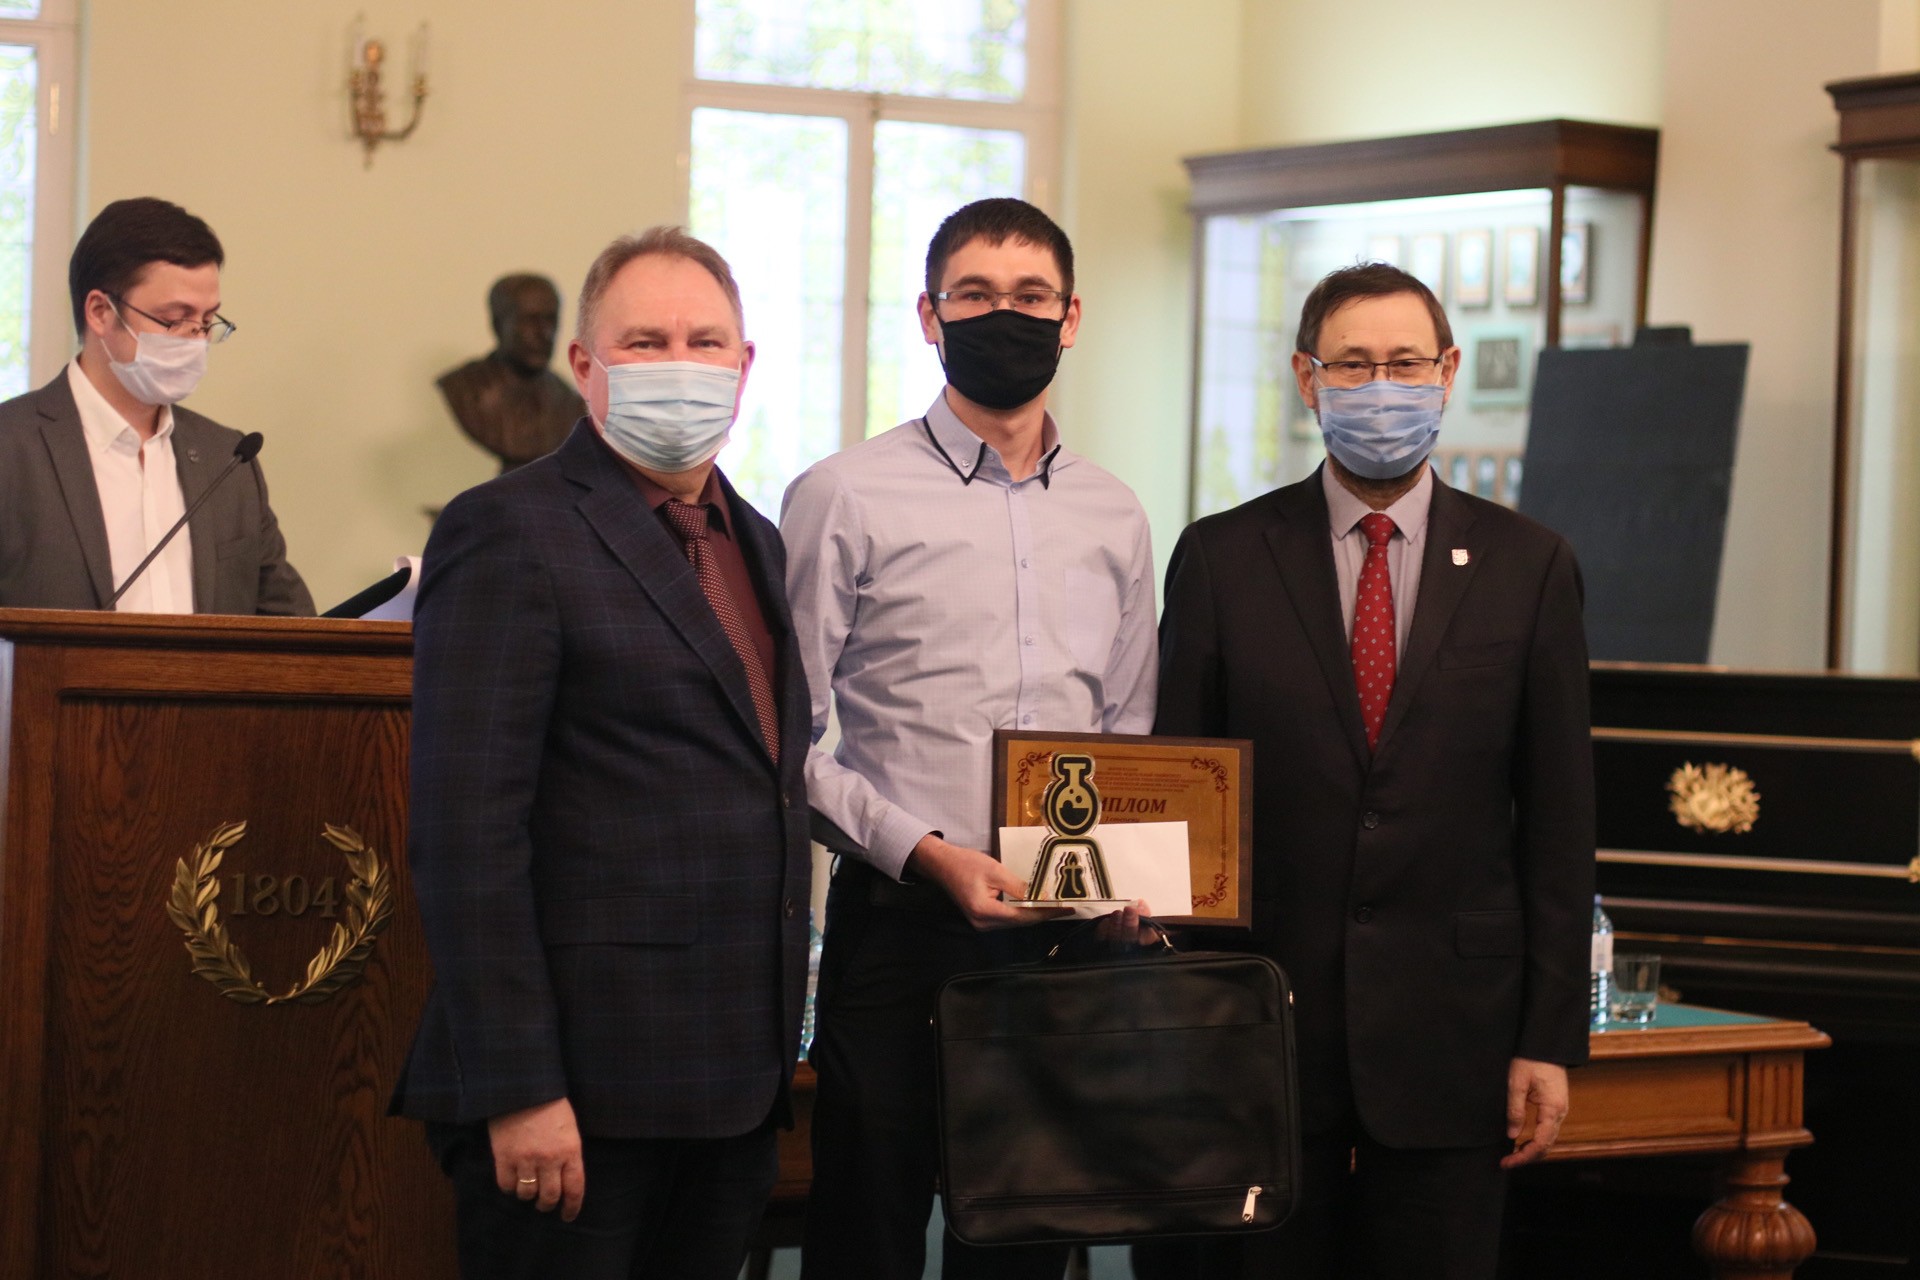 Arbuzov Prize for Young Scientists in Chemistry given to two employees of Kazan Federal University